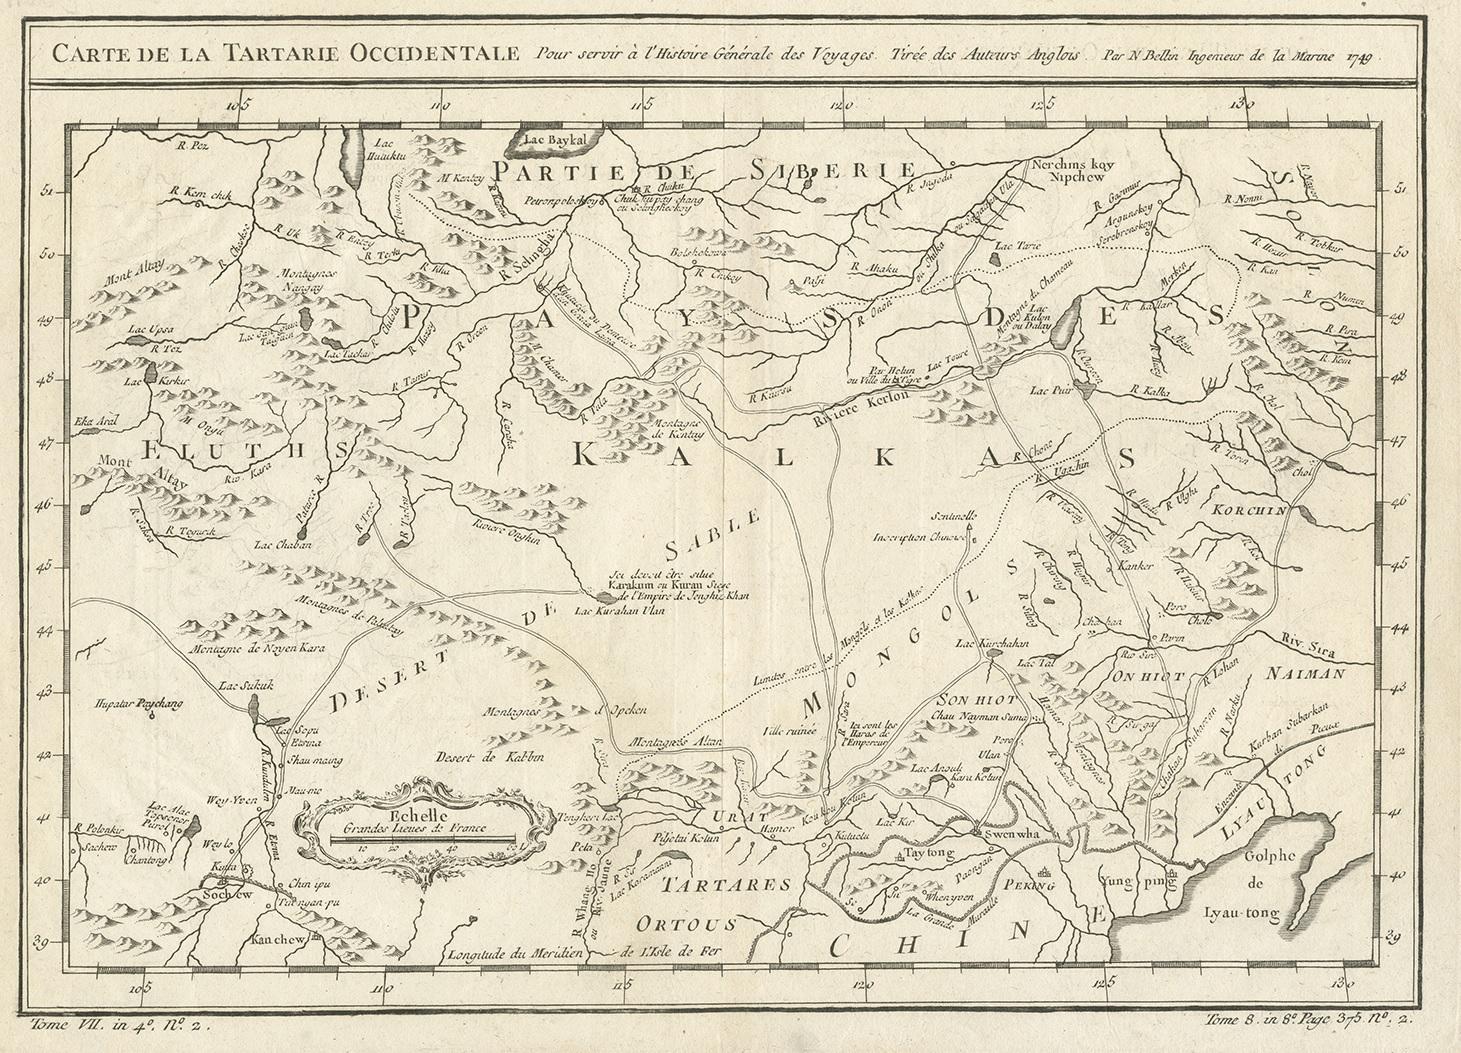 Antique map titled 'Carte de la Tartarie Occidentale'. Map of Tartary and northeast Asia, from Lake Baykal, Partie du Siberia in the north, Pays des Kalkas at the center, as well as Desert de Sable, and down to Chine and the Gulf de Lyau-tong.